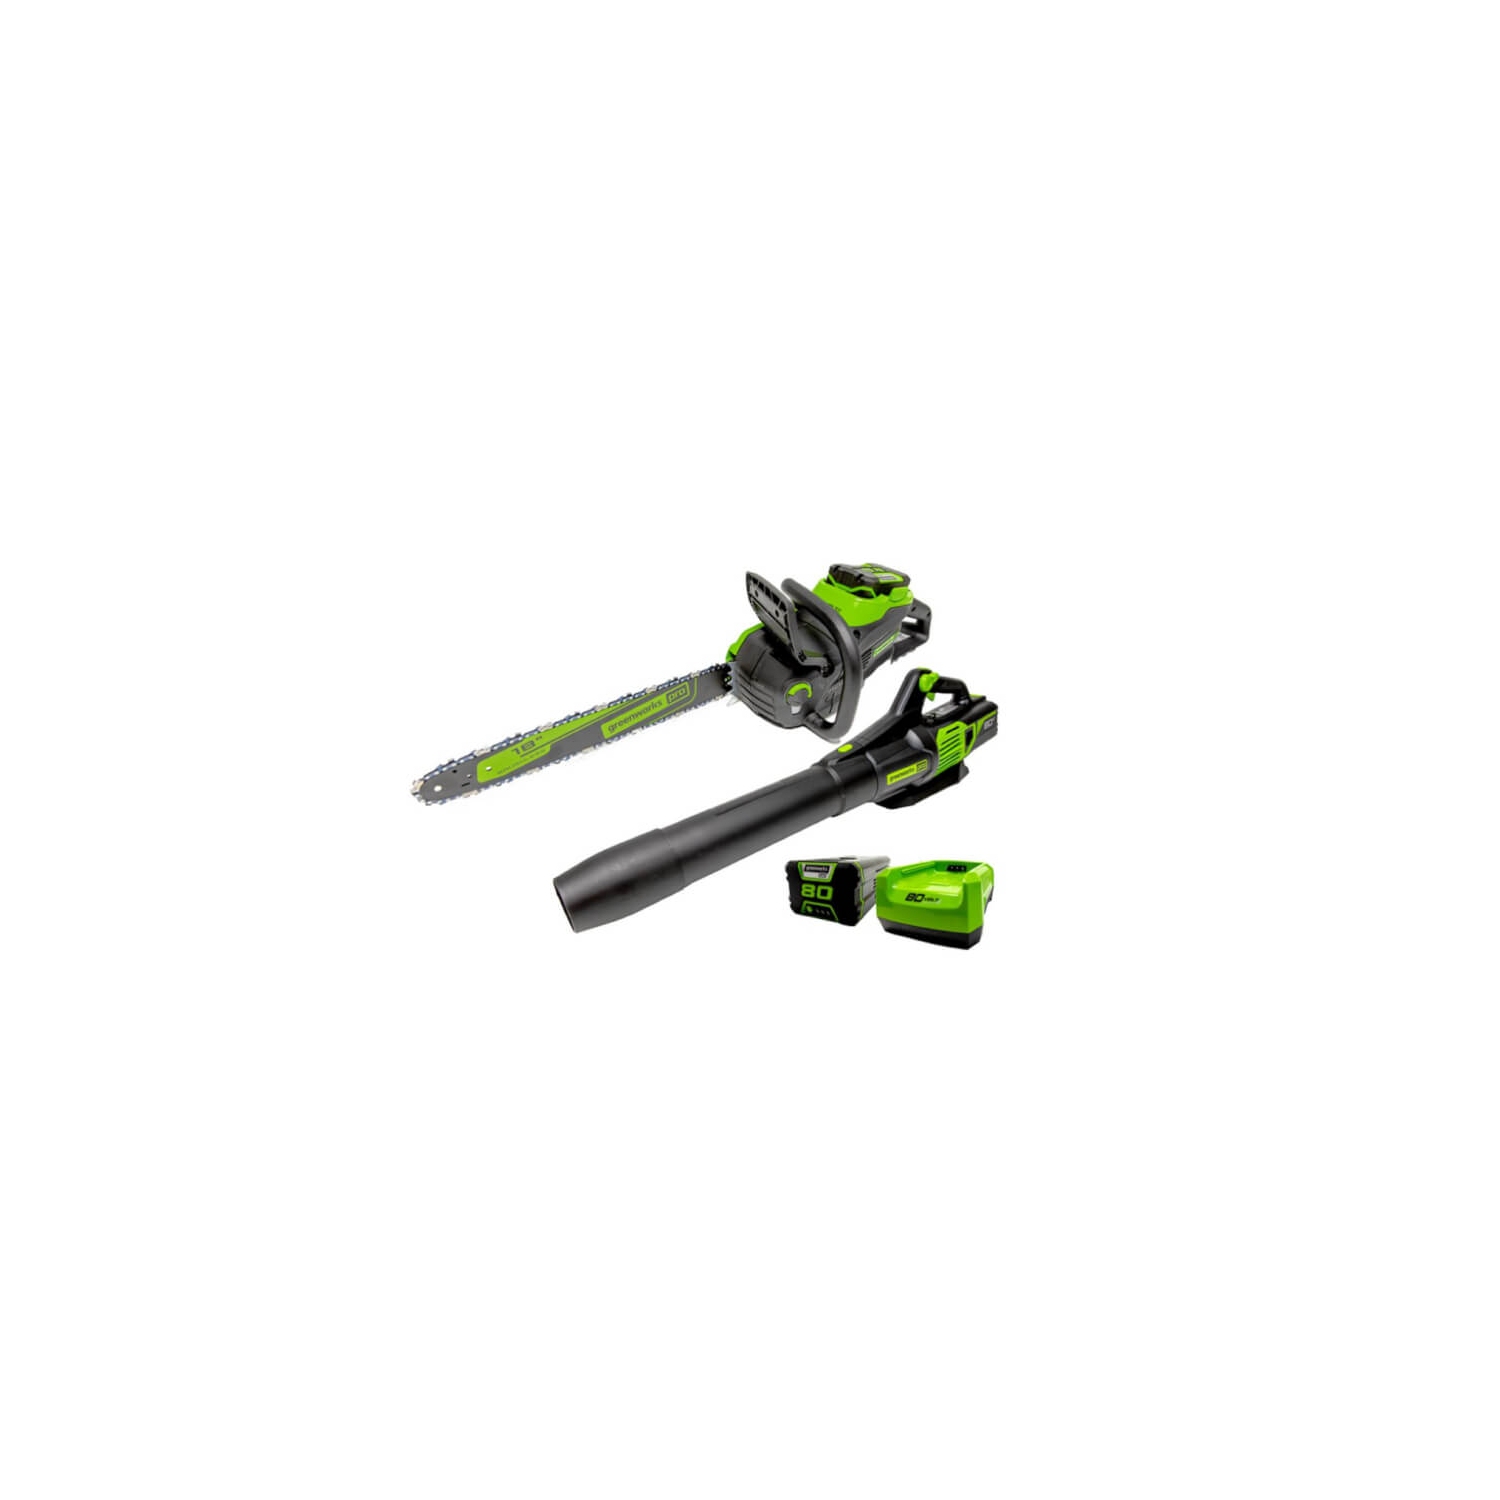 Greenworks PRO 80V 18-Inch Chainsaw + 155 MPH - 650 CFM Brushless Axial Jet Blower, 2.0 AH Battery and Charger Included